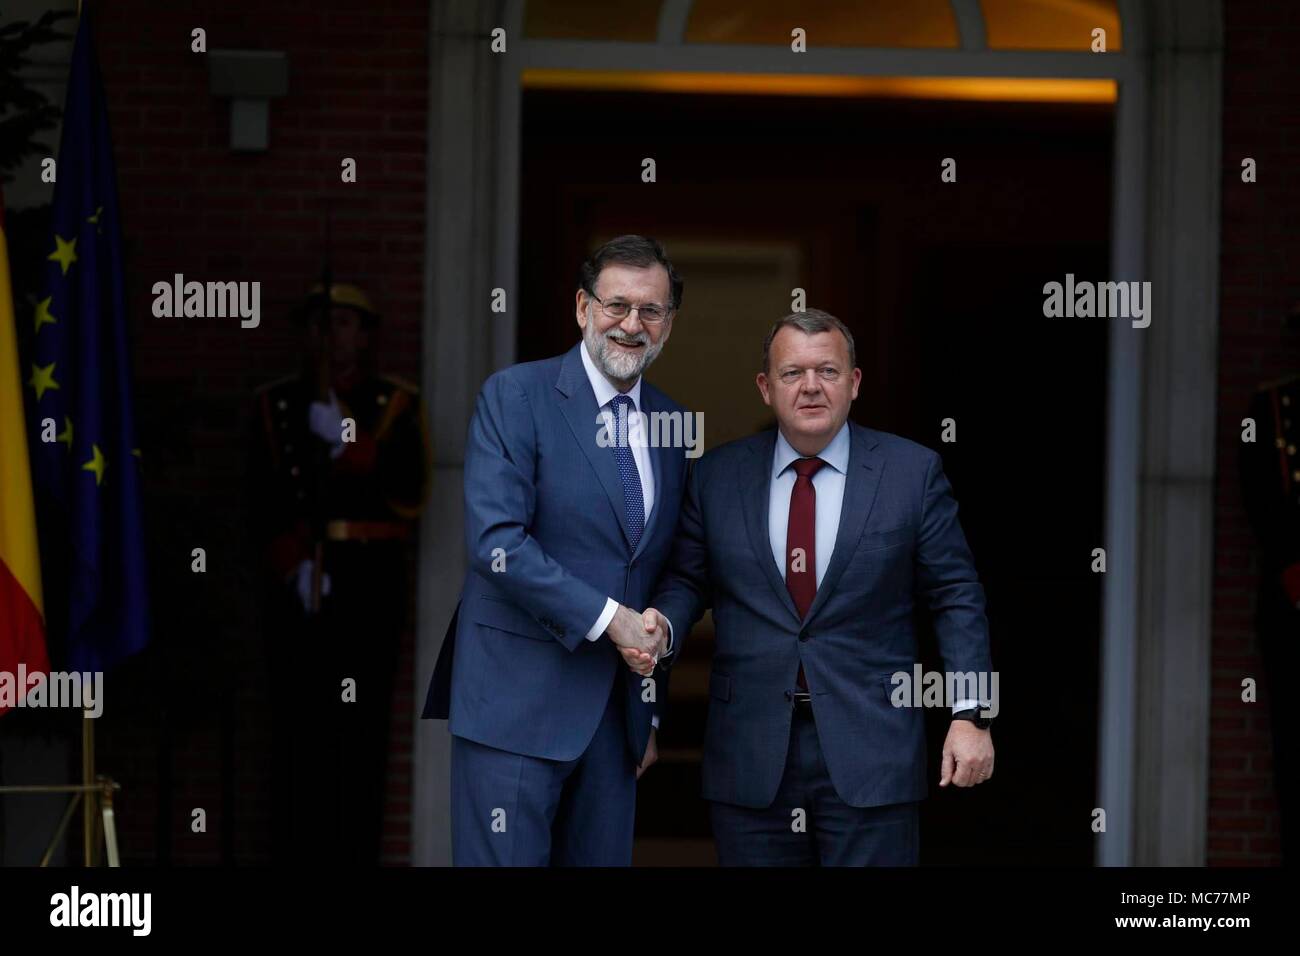 Spanish President Mariano Rajoy and Denmark Prime Minister, Lars Lokke Rasmussen  during a ceremony at Moncloa Palace on April 13, 2018 in Madrid.  Cordon Press/EP888 Stock Photo